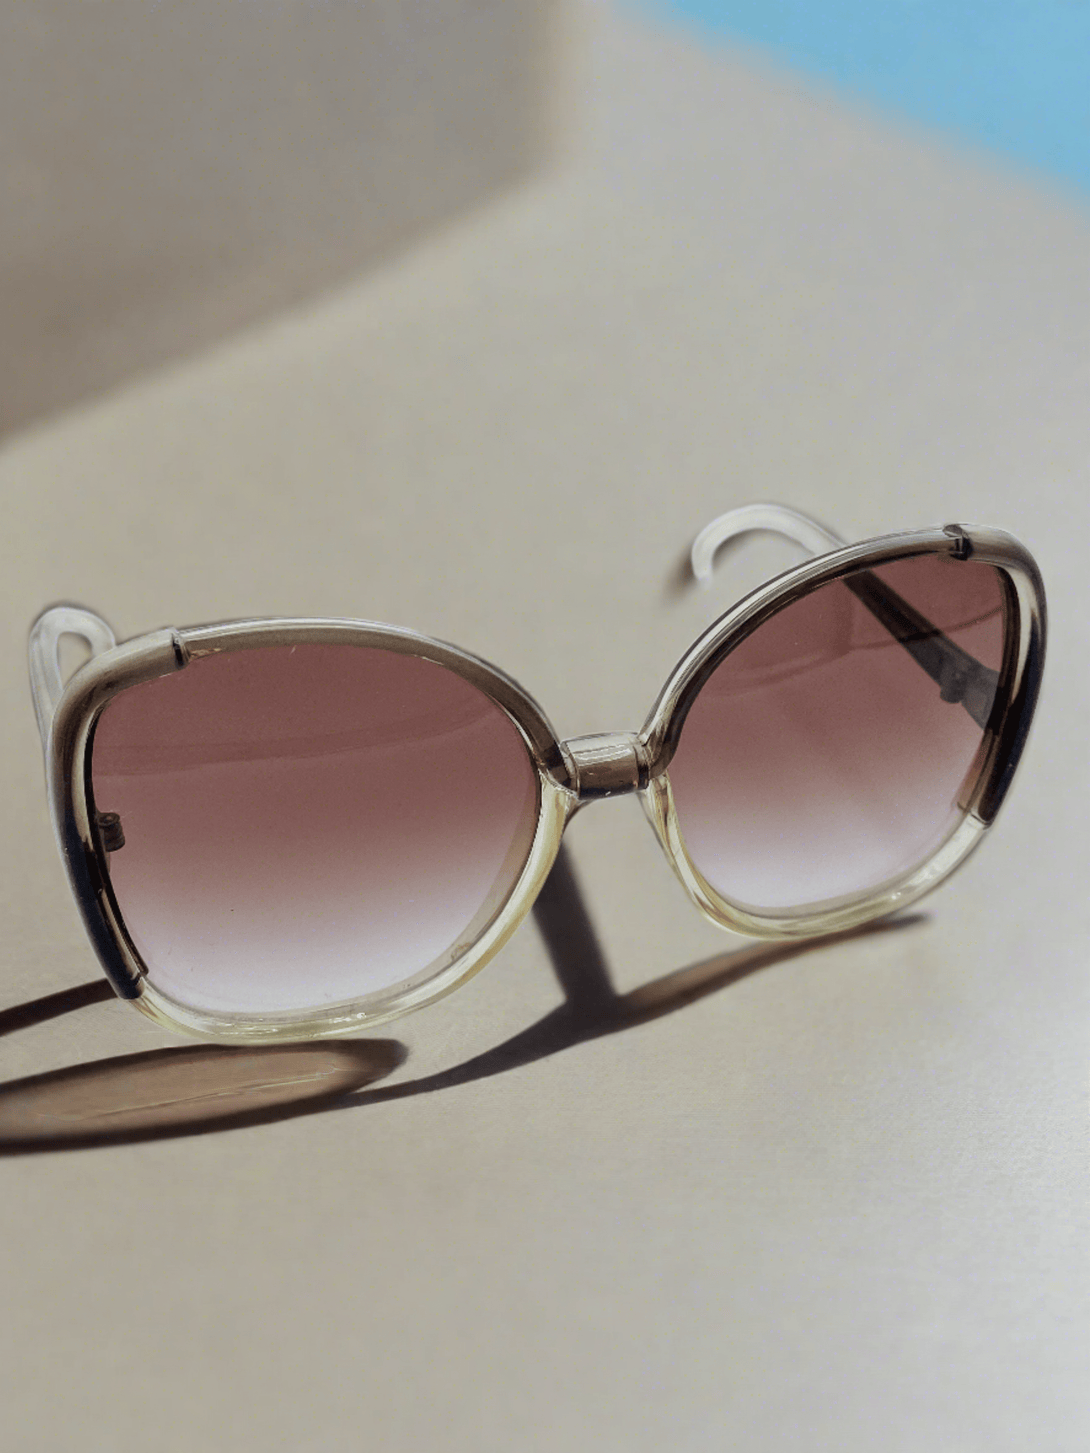 Women's Vintage French Oval Shaped Sunglasses